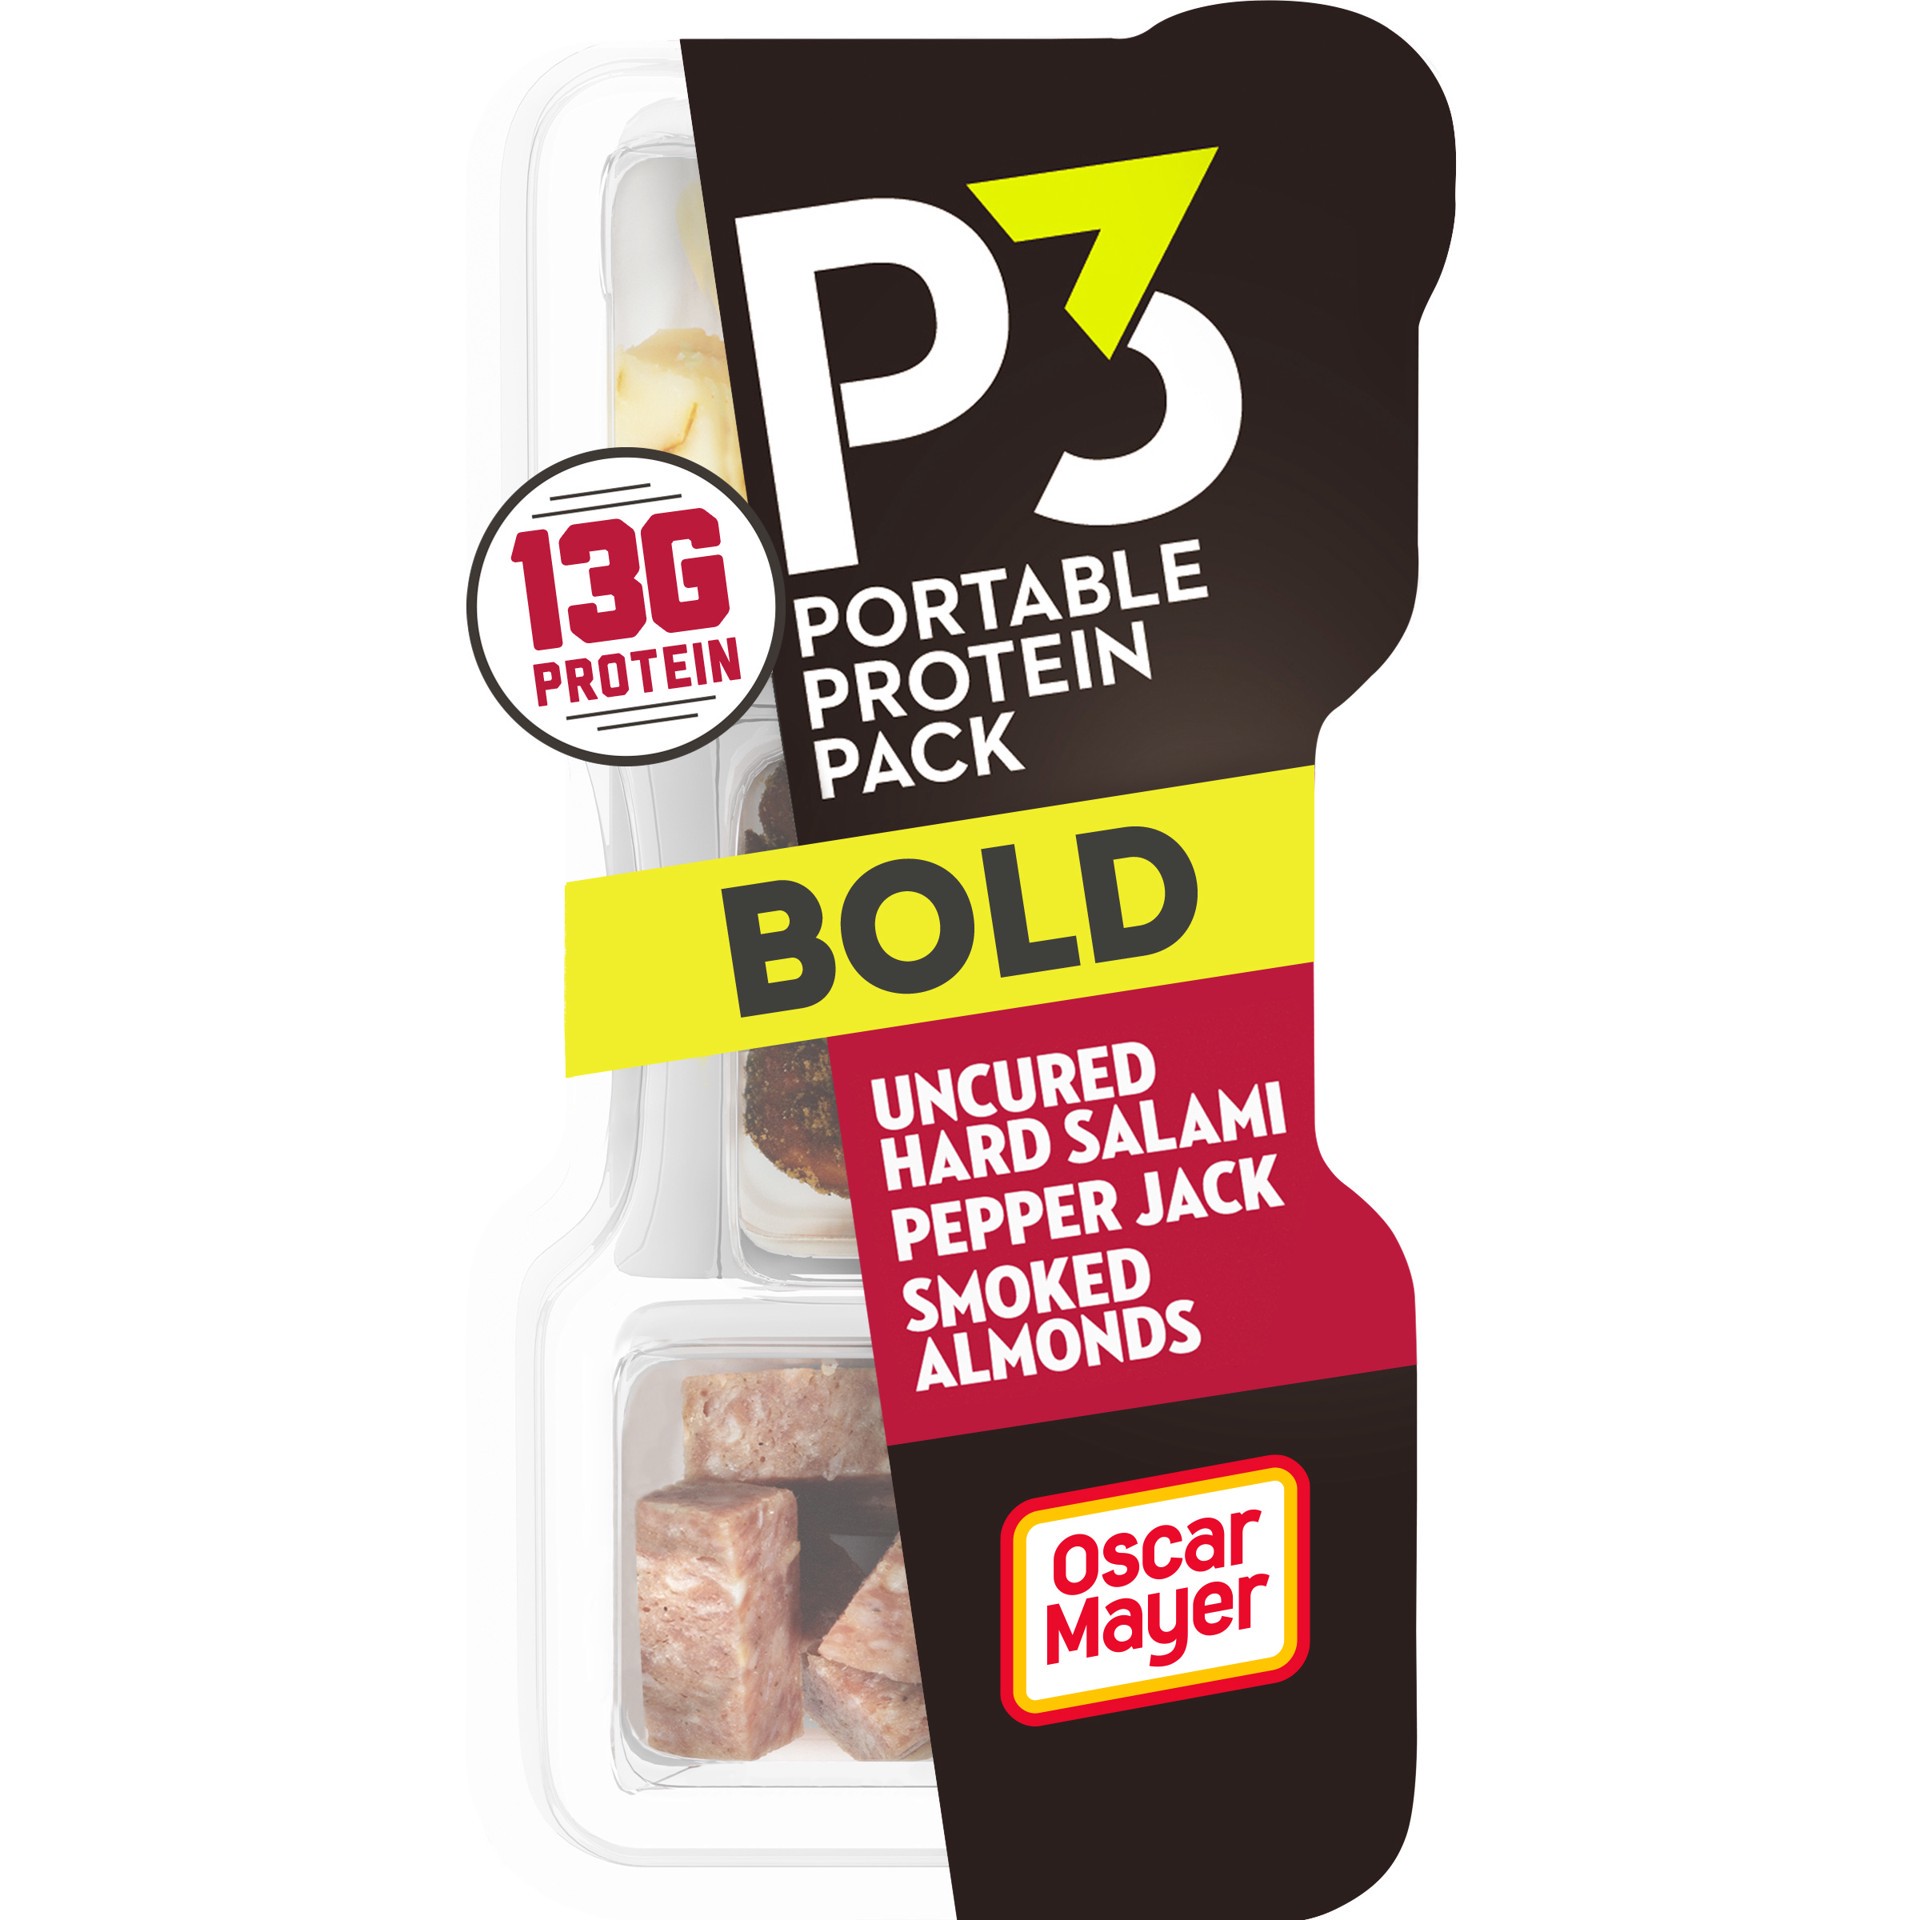 slide 1 of 9, P3 Bold Portable Protein Snack Pack with Uncured Hard Salami, Pepper Jack Cheese & Smoked Almonds, 2 oz Tray, 2 oz